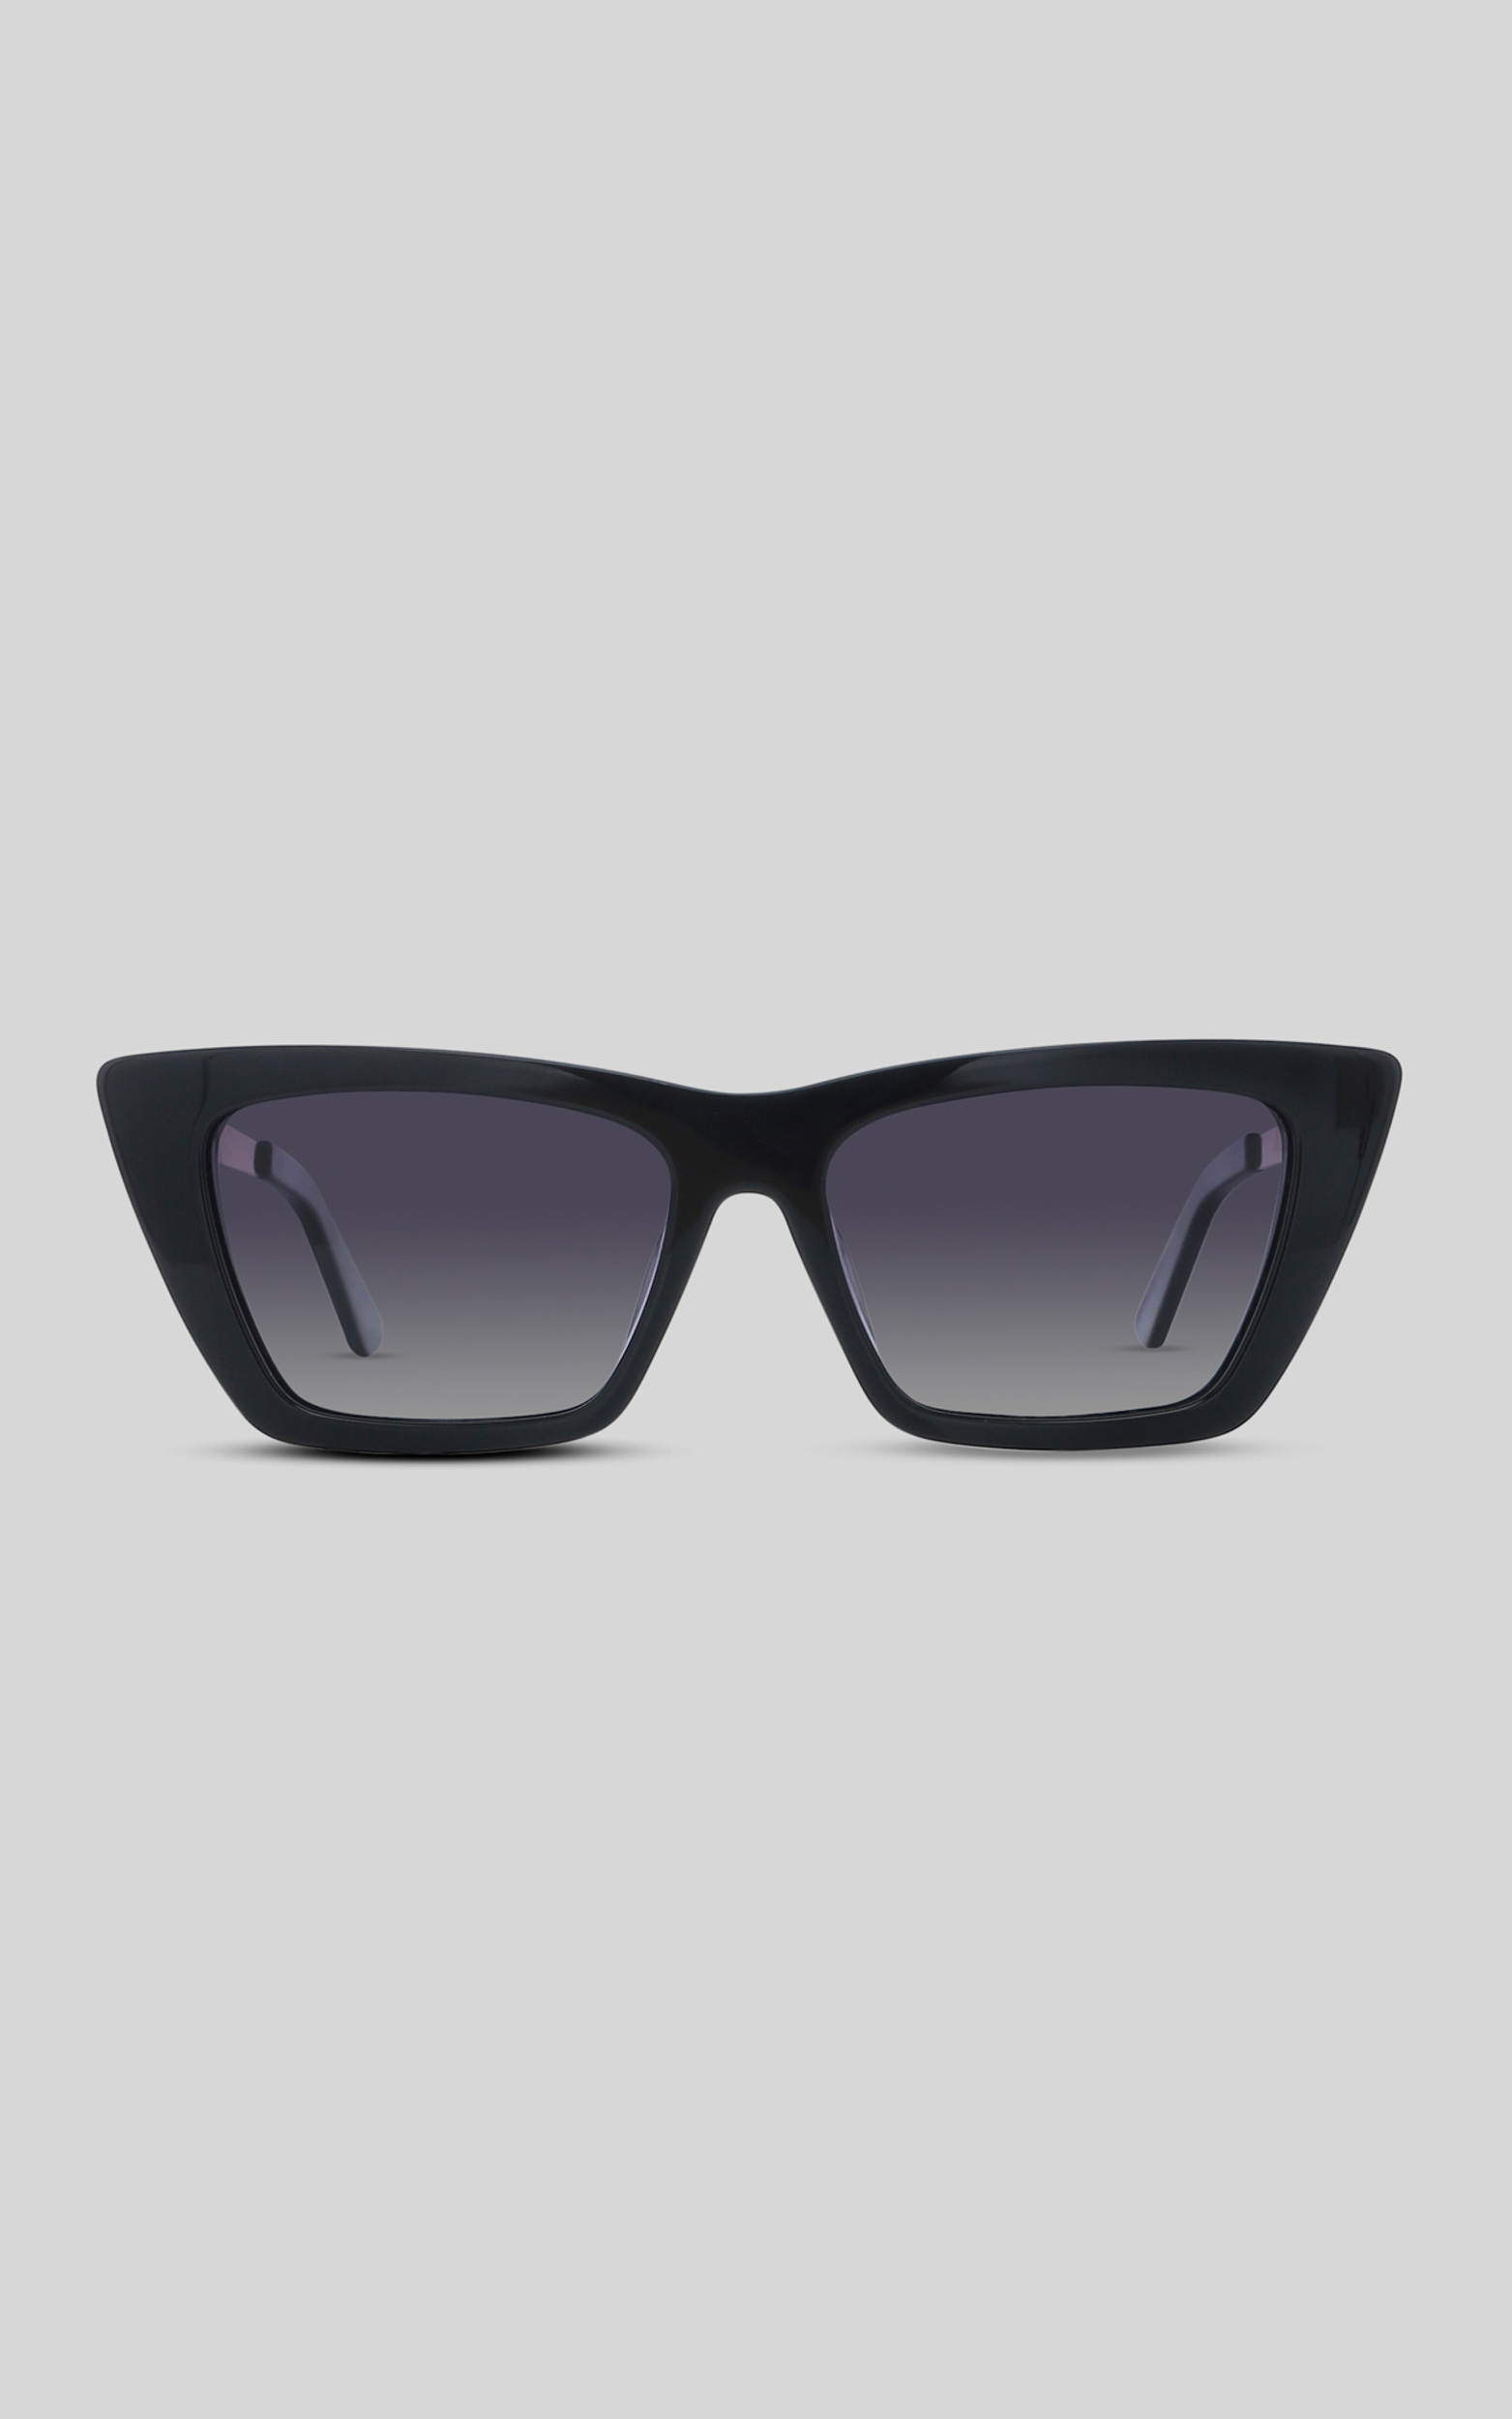 Banbe Eyewear - The Twiggy Sunglasses in Black/Black Fade - NoSize, BLK1, hi-res image number null